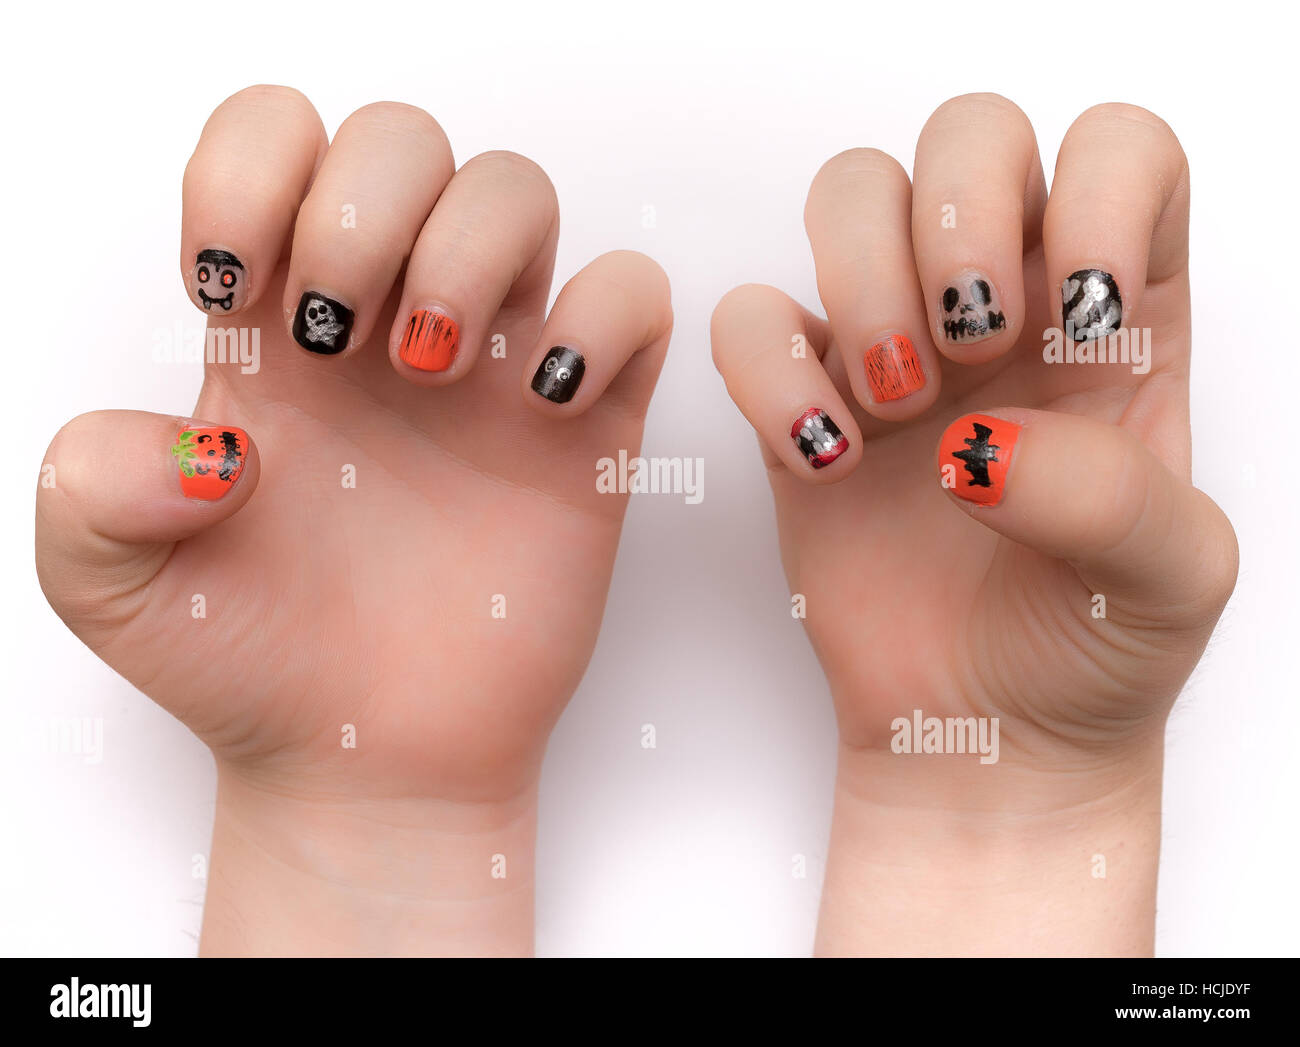 Young lady's fingernails painted artistically with Halloween icons and symbols, isolated on white Stock Photo